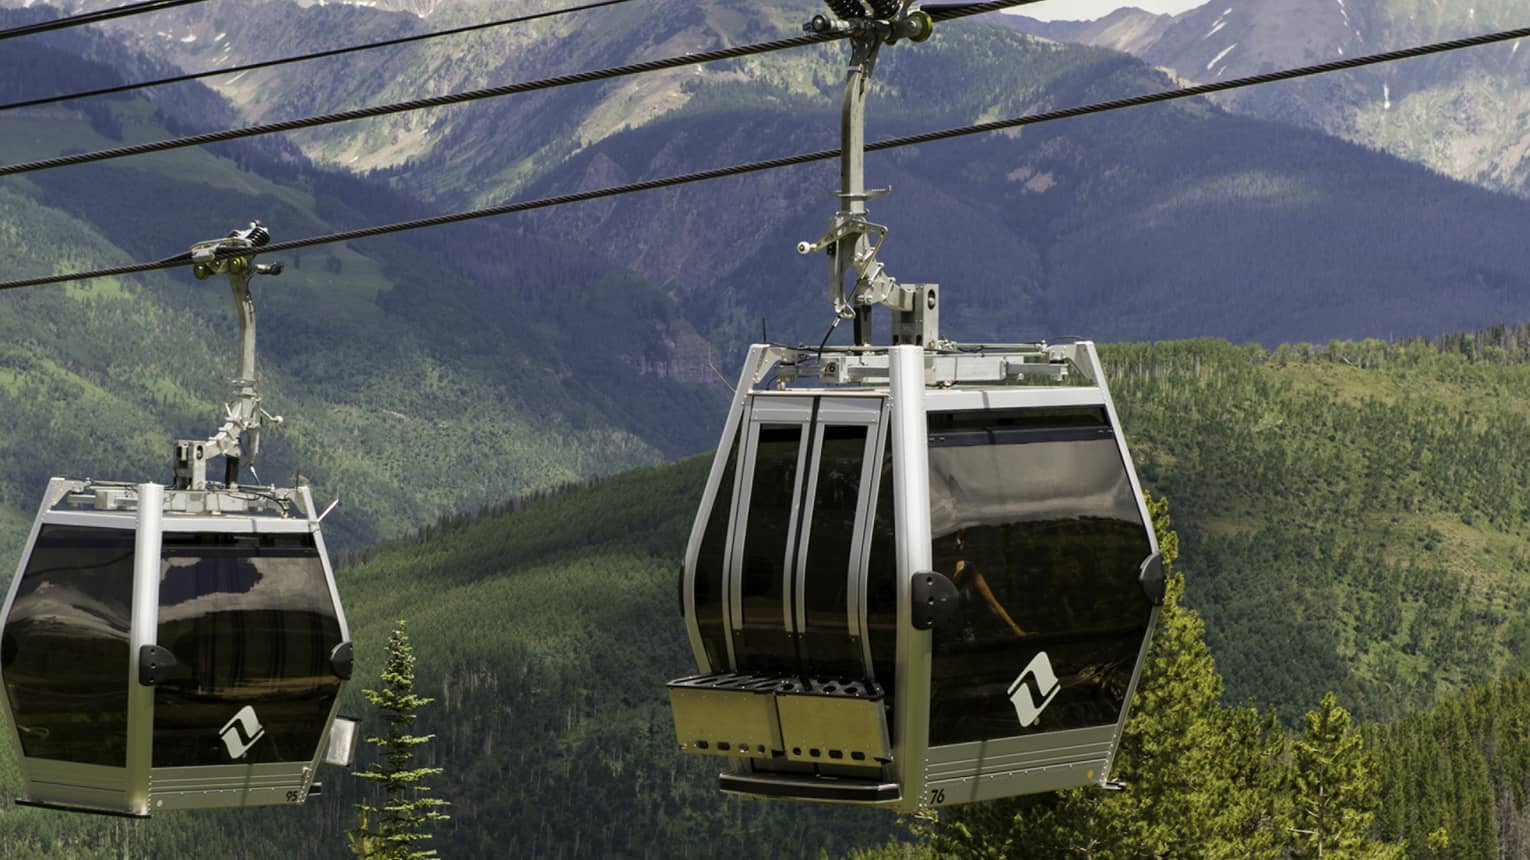 Two gondolas travelling over a forested area.